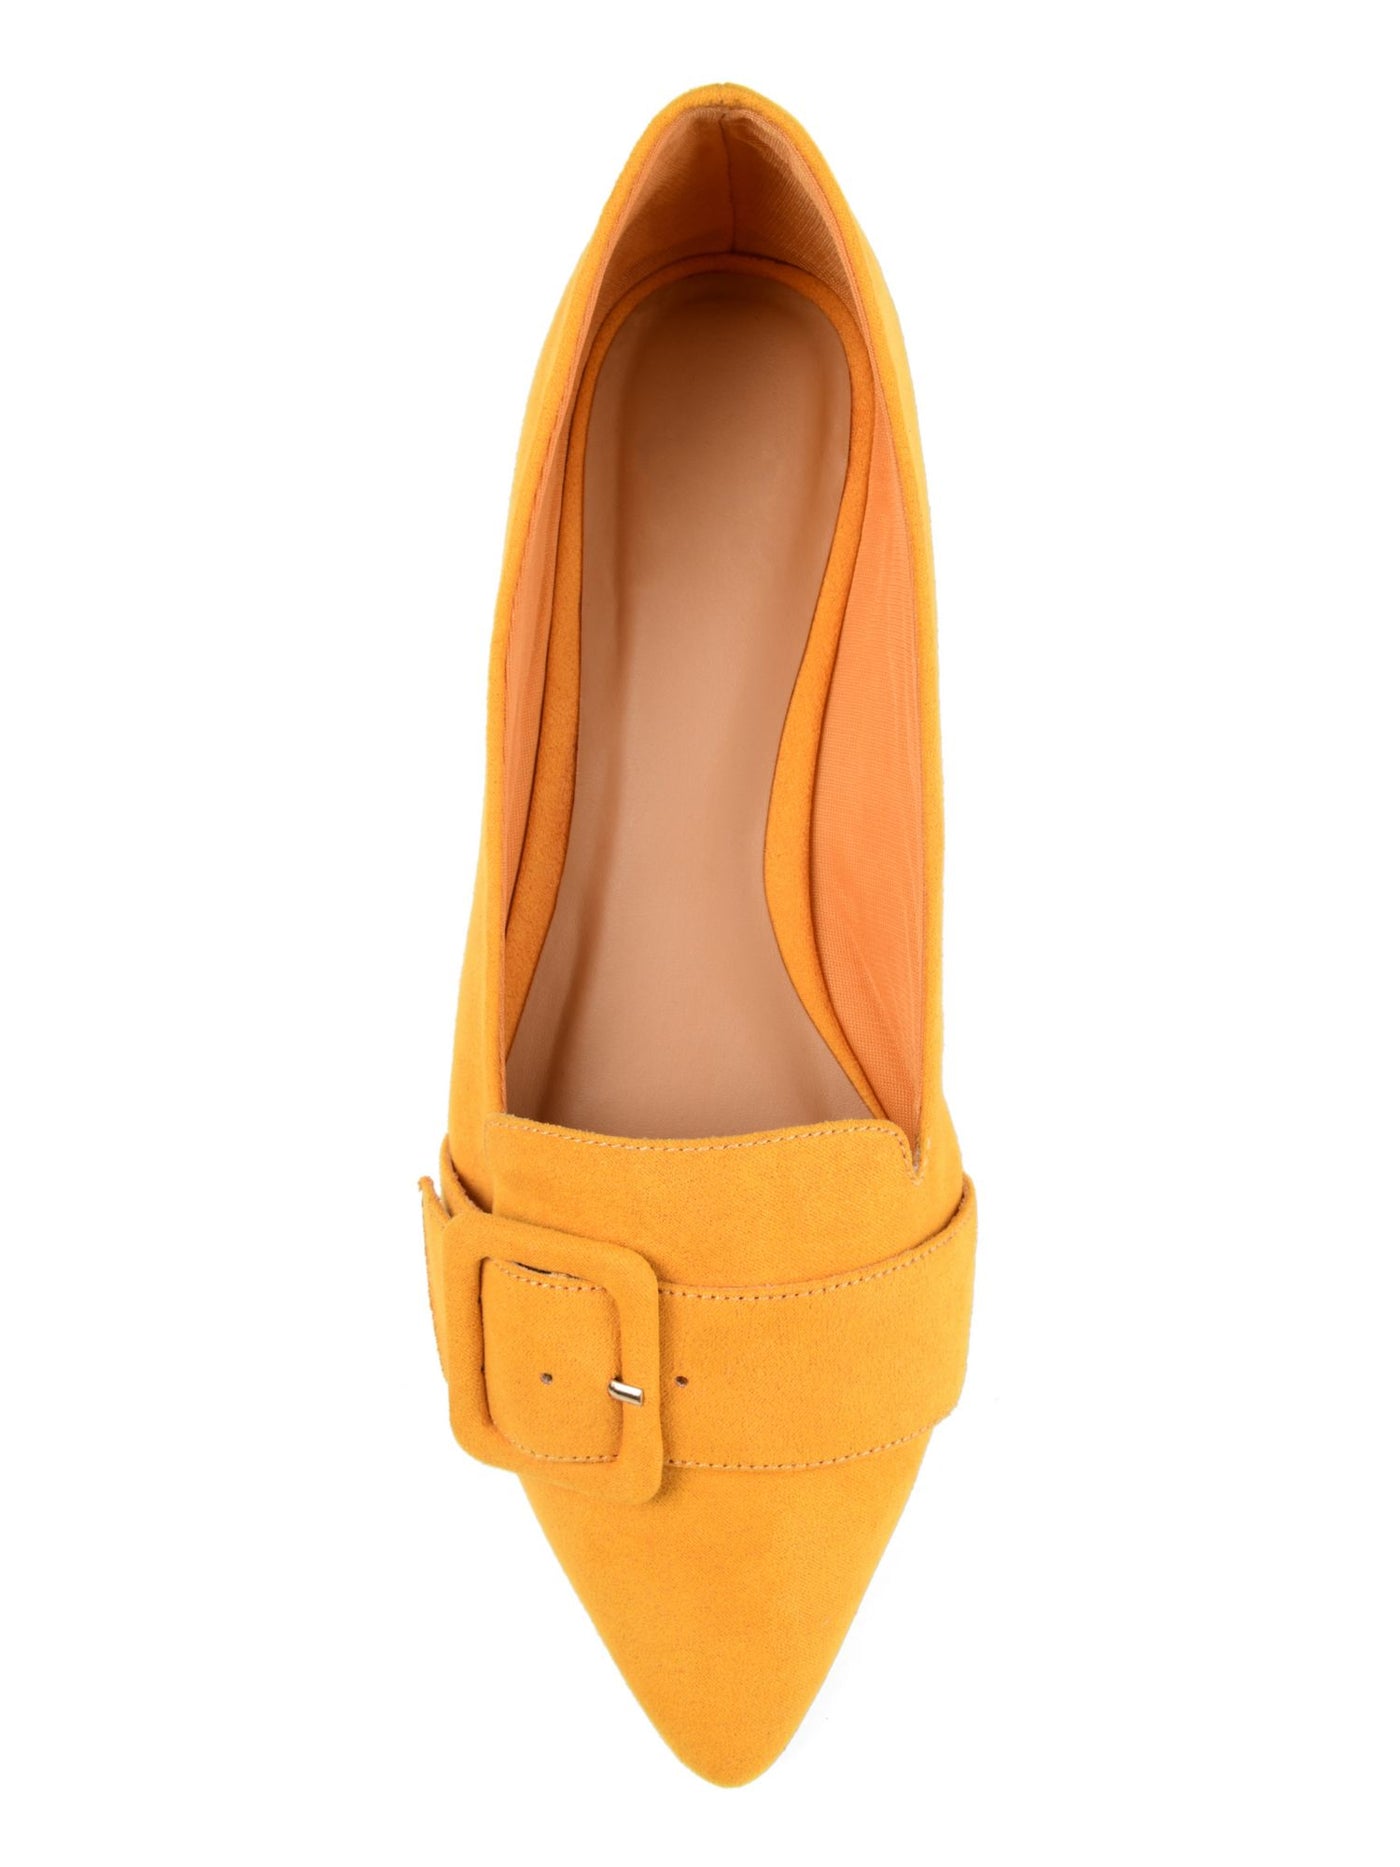 JOURNEE COLLECTION Womens Yellow Buckle Accent Cushioned Audrey Pointed Toe Slip On Loafers Shoes 7.5 M